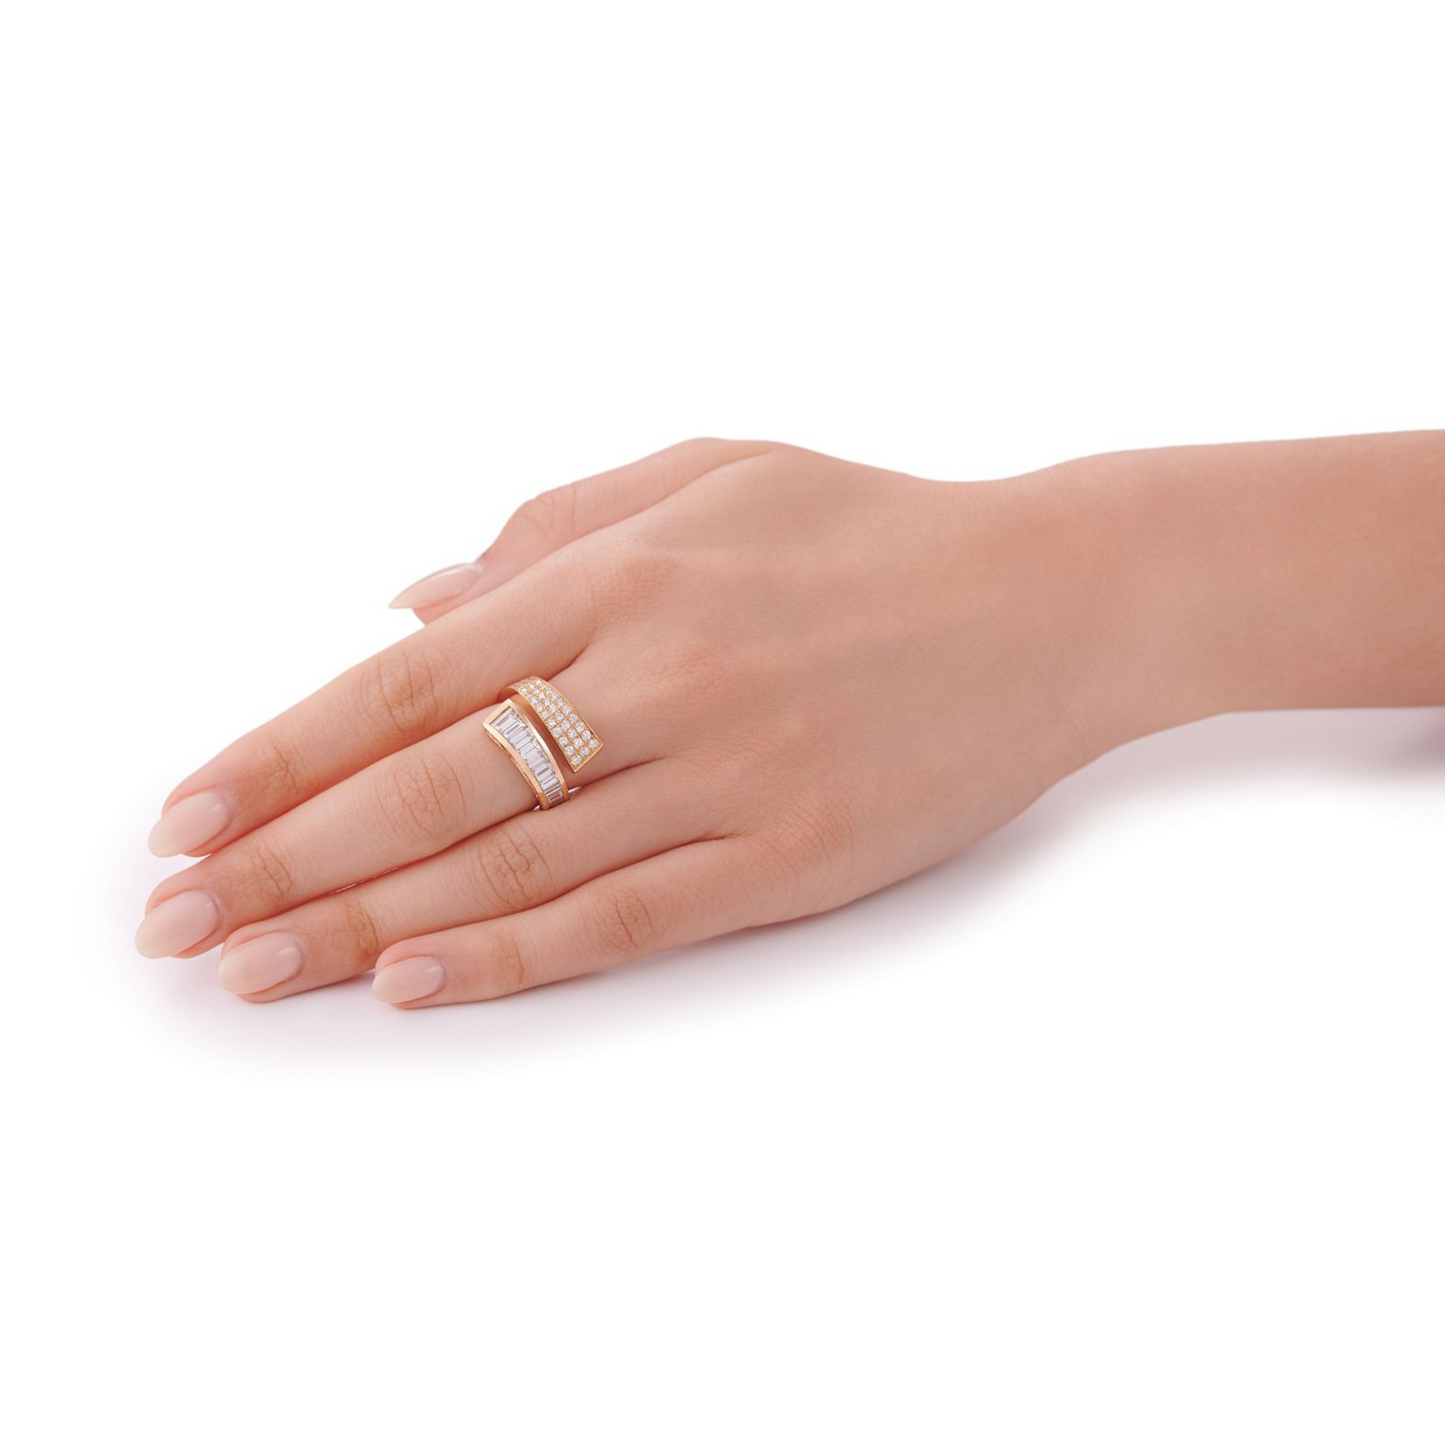 Baguette Cut and Pavé Set Rose Gold Infinity Ring